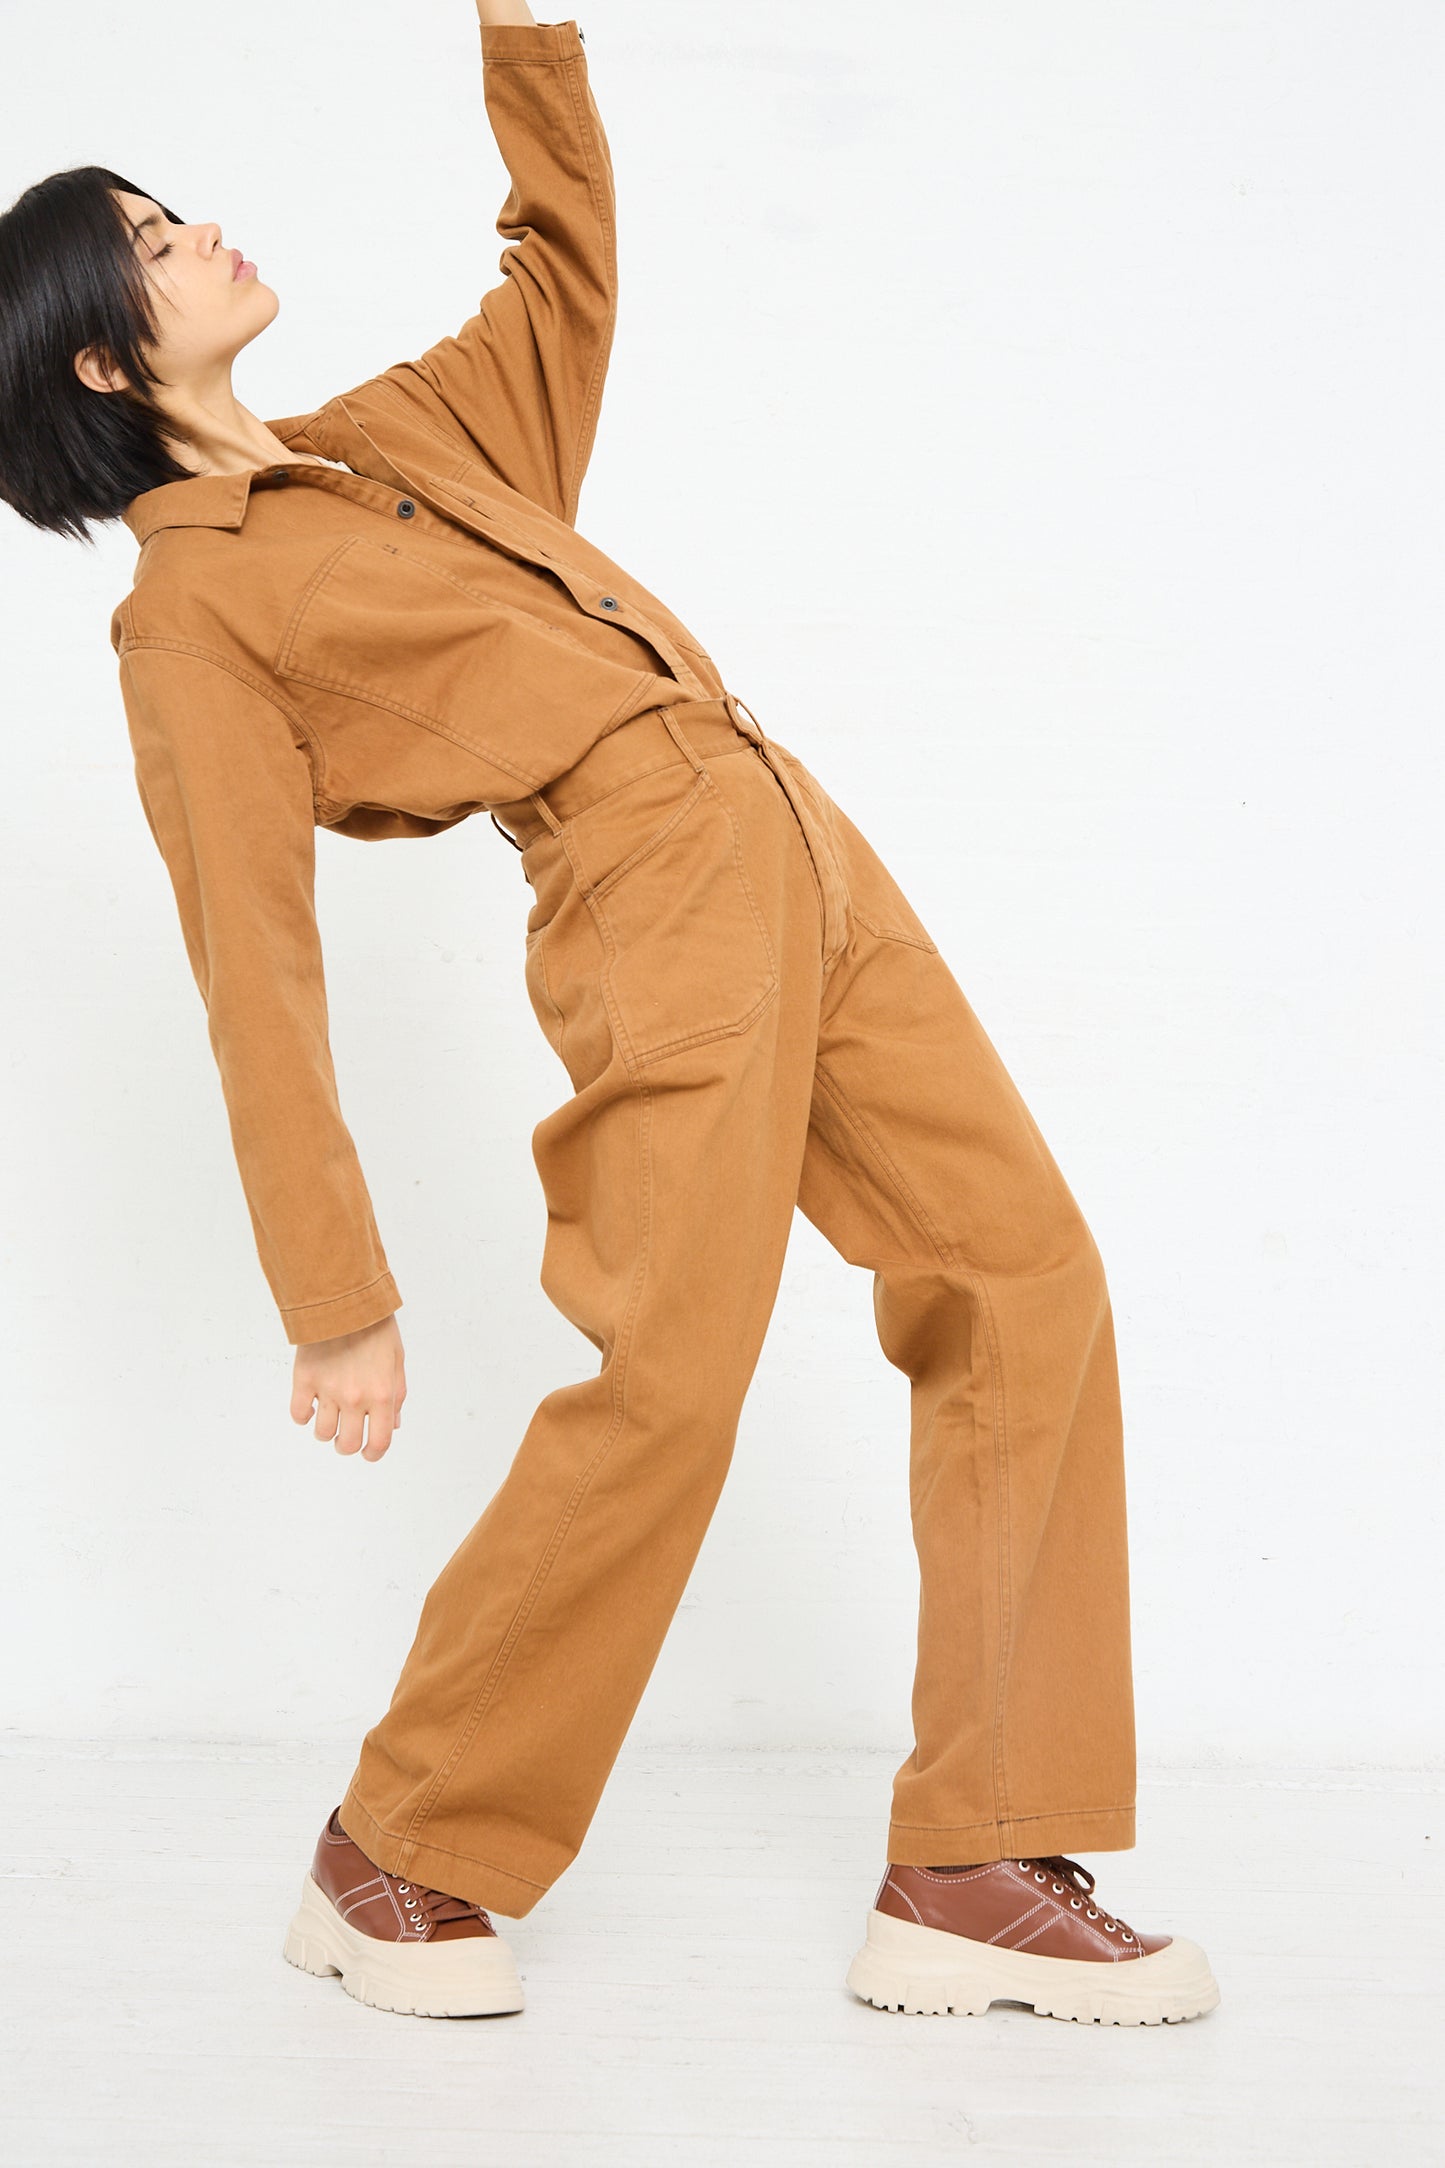 Woman in a Chimala Classic Drill US Army Work Trouser in Camel jumpsuit made from Japanese cotton canvas posing dynamically against a white background.